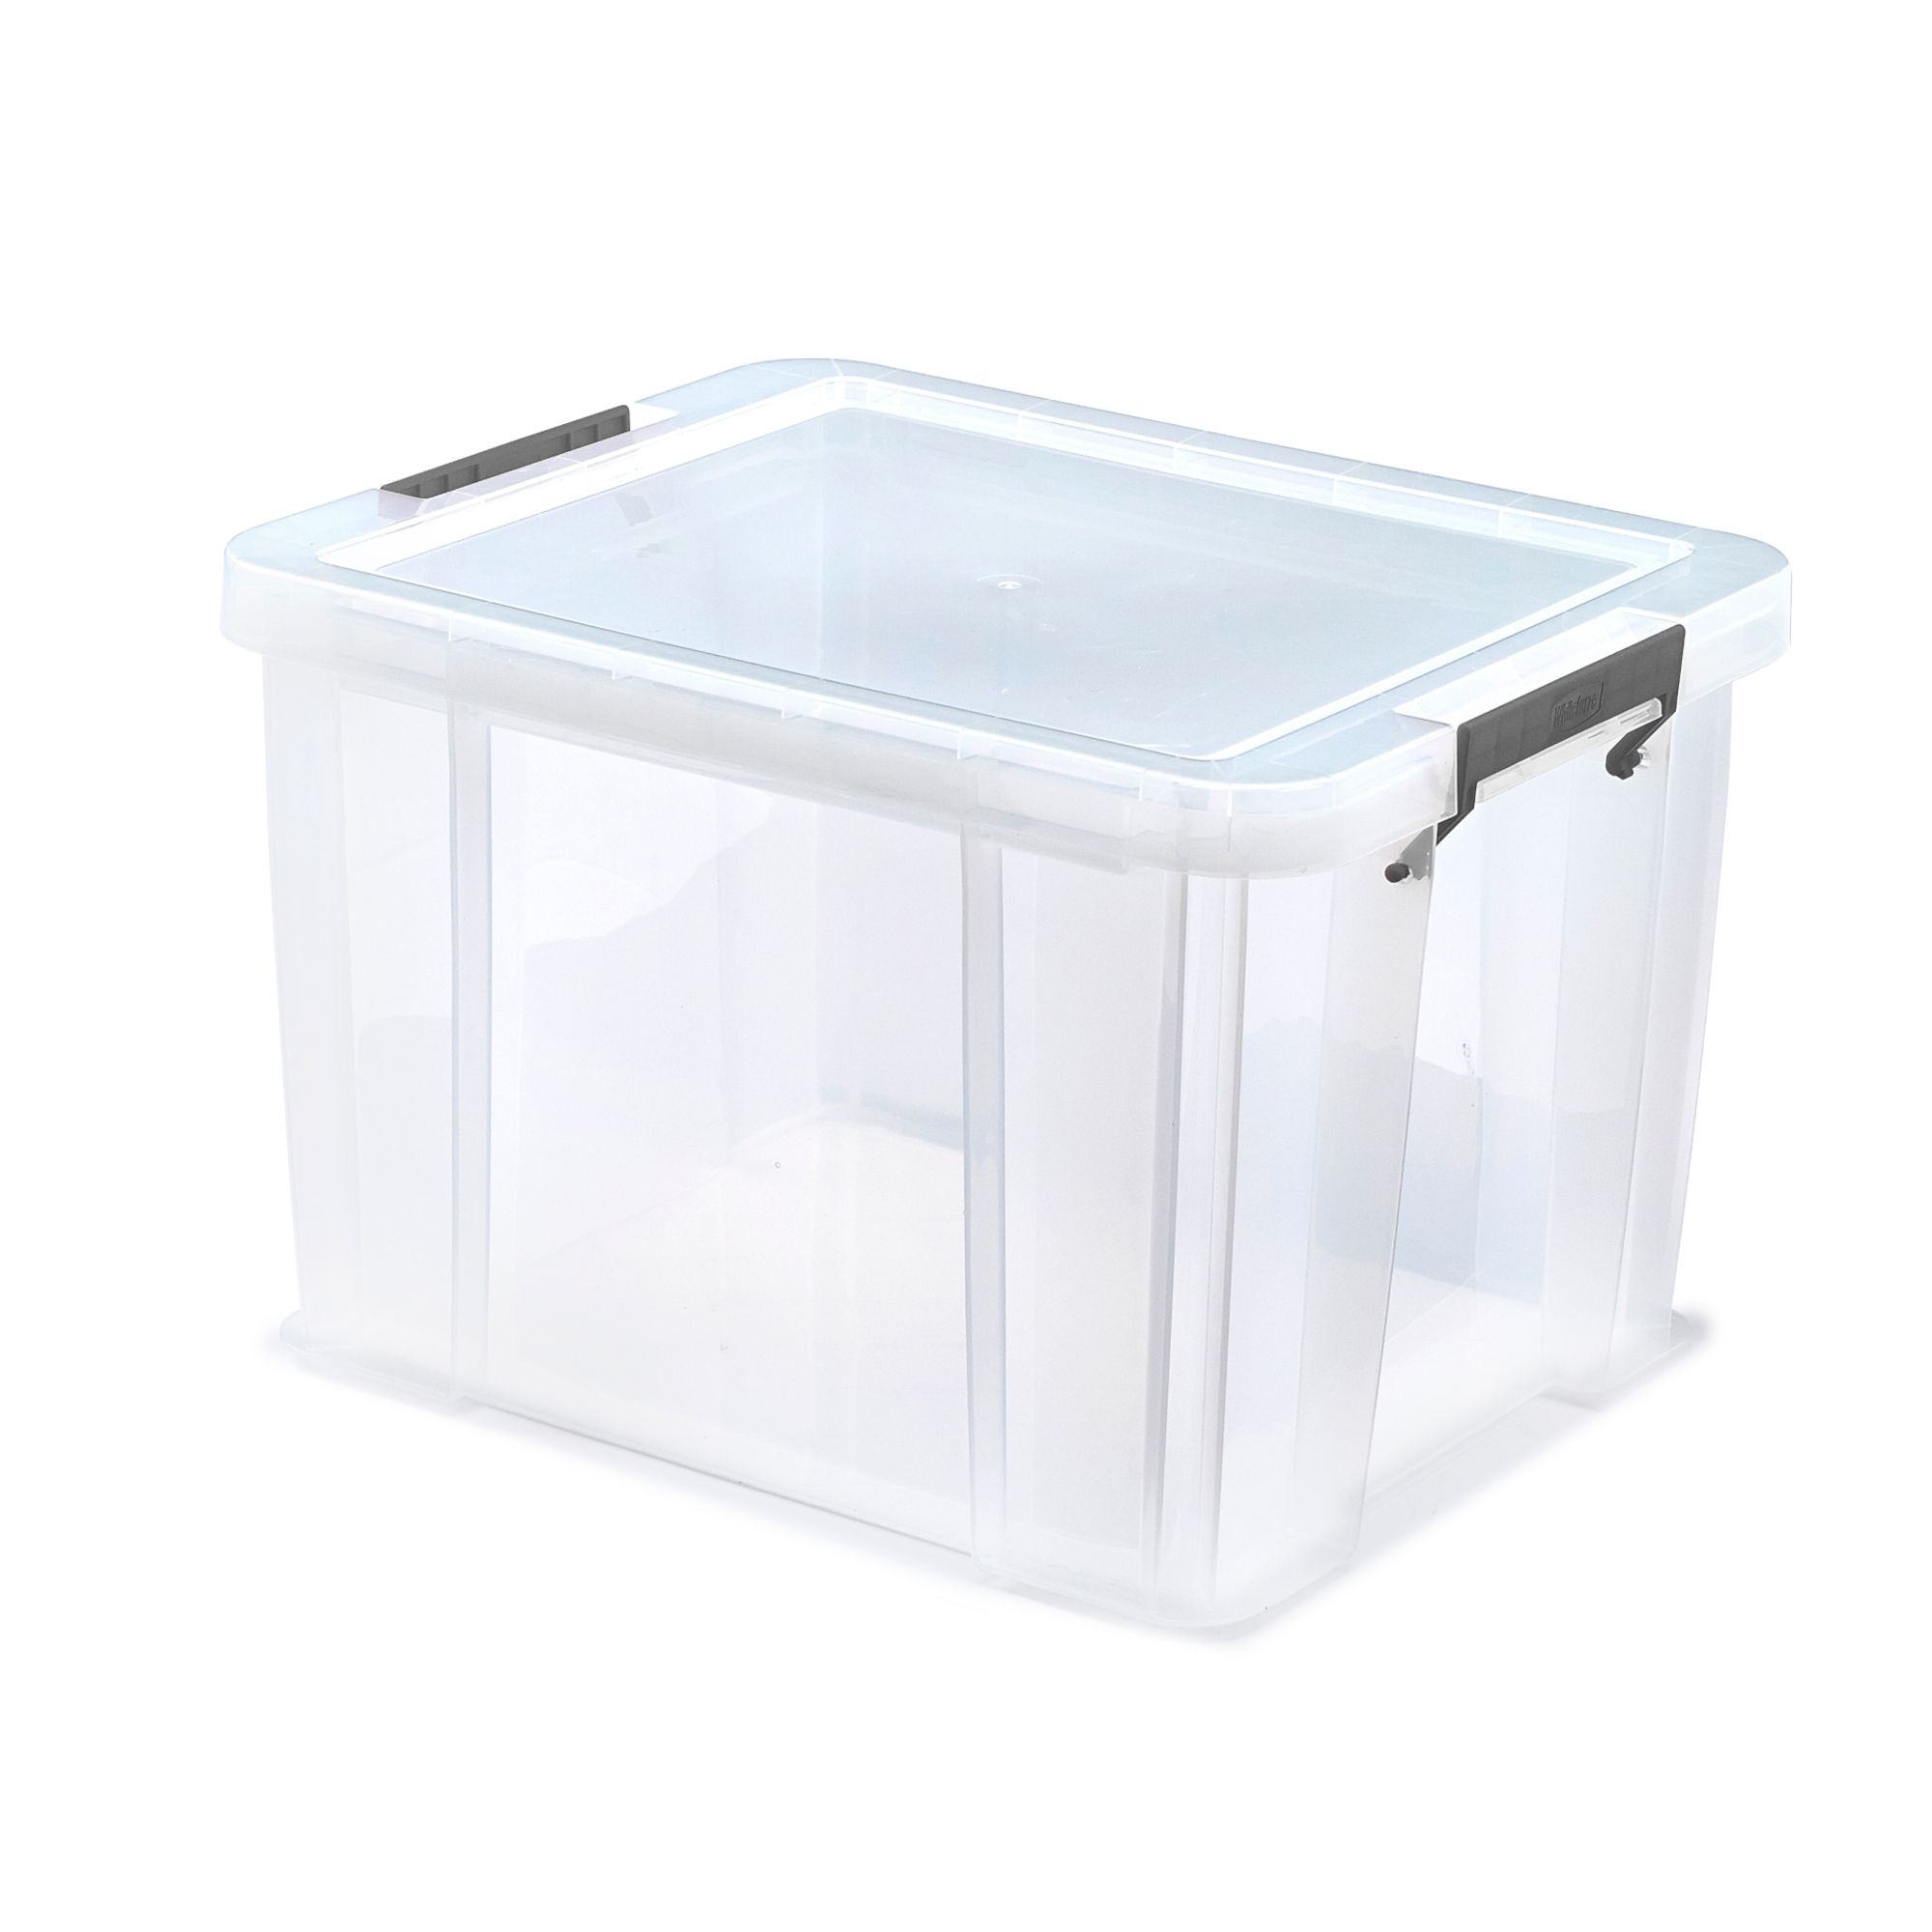 https://media.diy.com/is/image/Kingfisher/allstore-heavy-duty-36l-large-plastic-stackable-storage-box-with-lid~5016447039393_01c?$MOB_PREV$&$width=768&$height=768